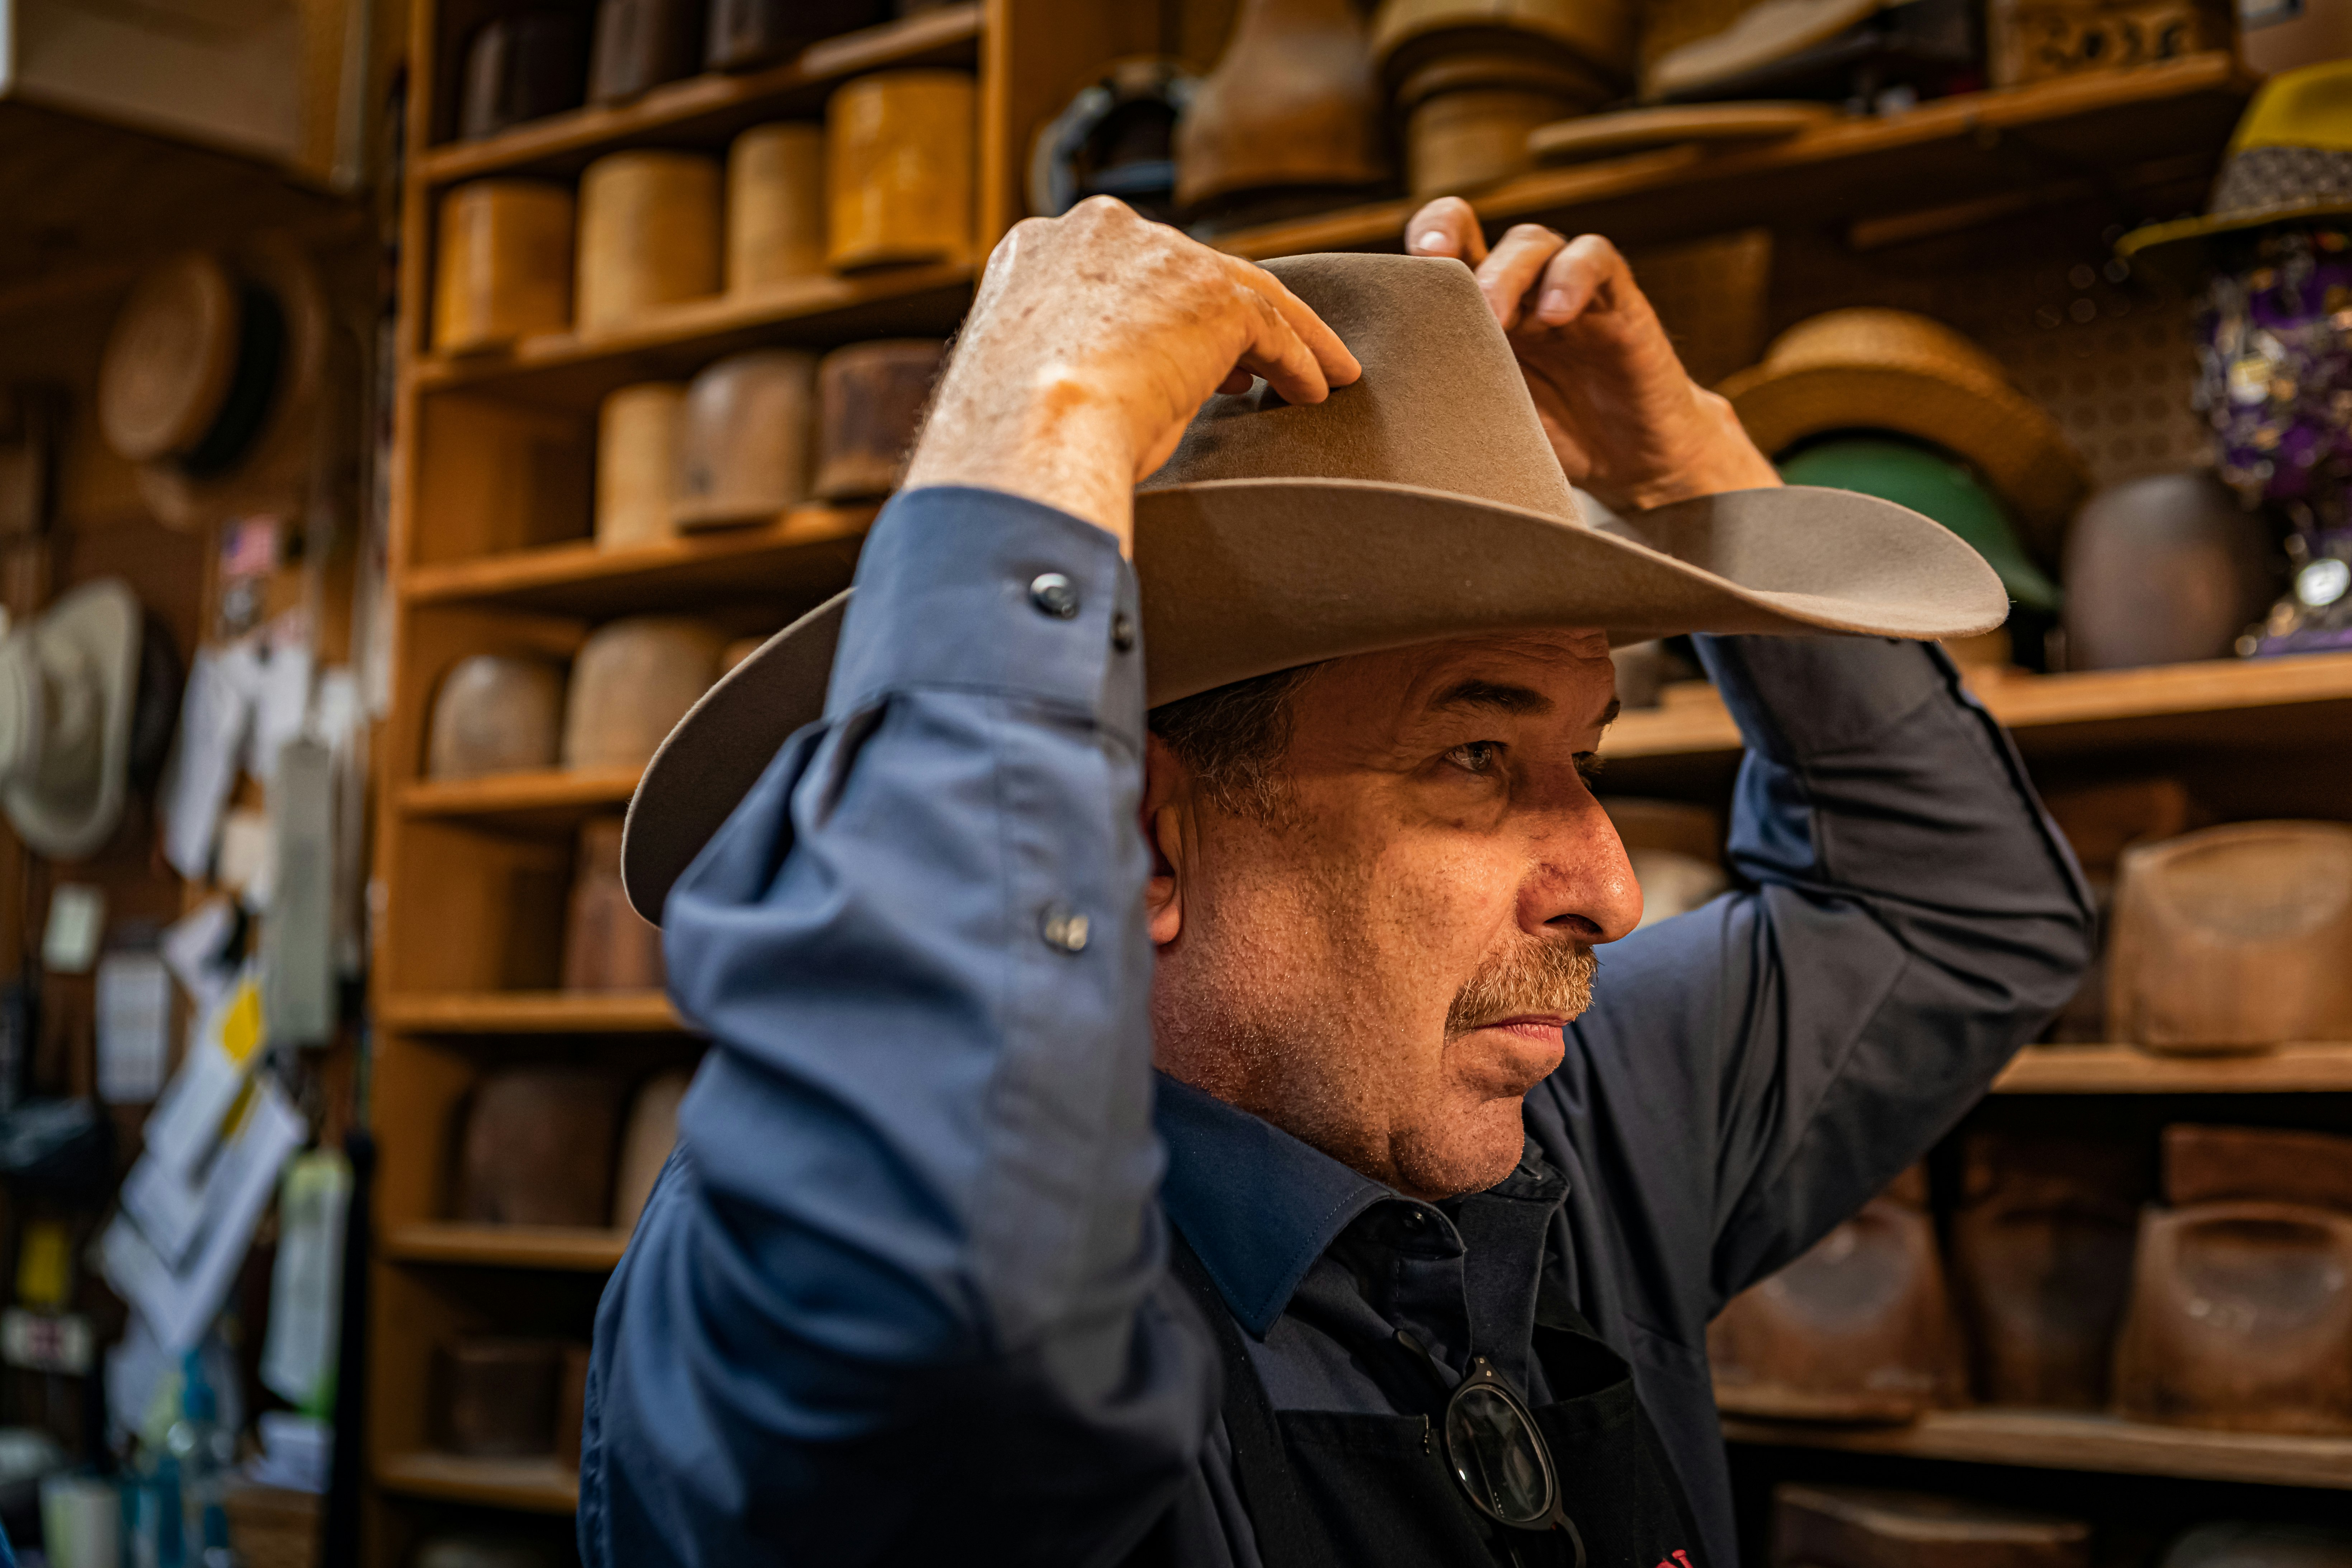 Jack Kellogg stands in profile to the viewer as he adjusts a large Stetson cowboy hat in a light brown color. In the background are many wooden hat molds on shelves